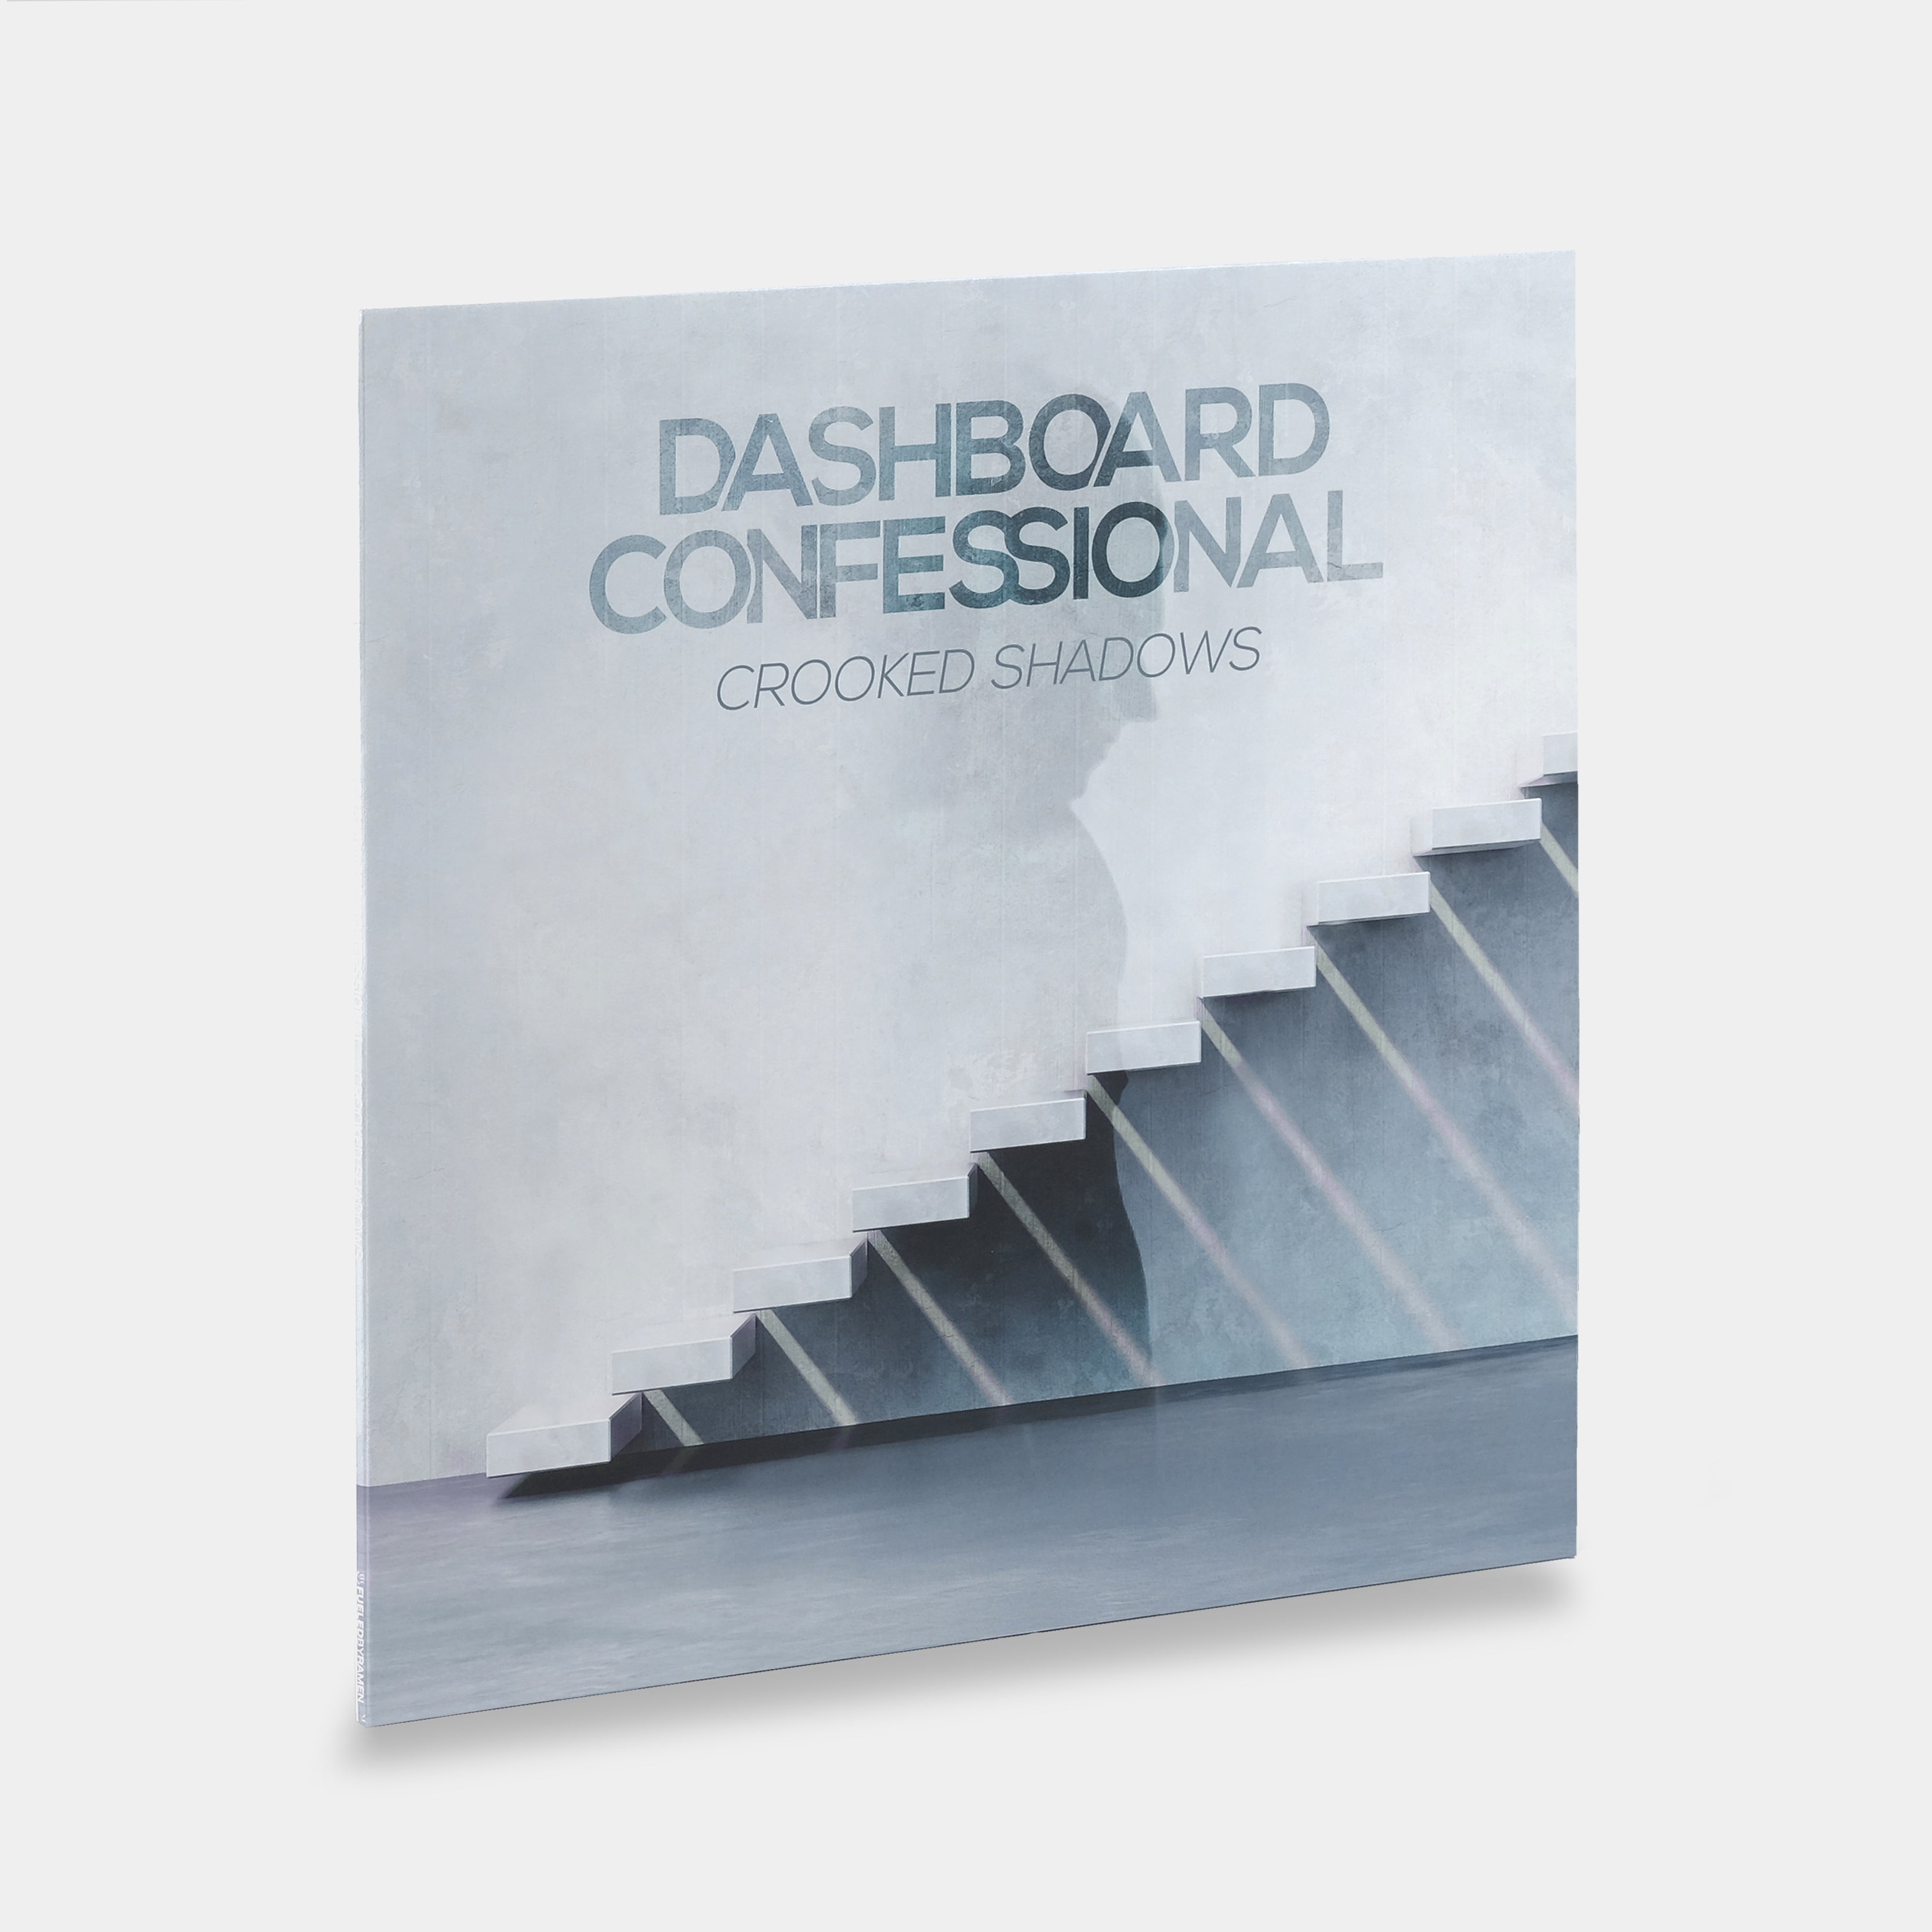 Dashboard Confessional - Crooked Shadows LP Vinyl Record